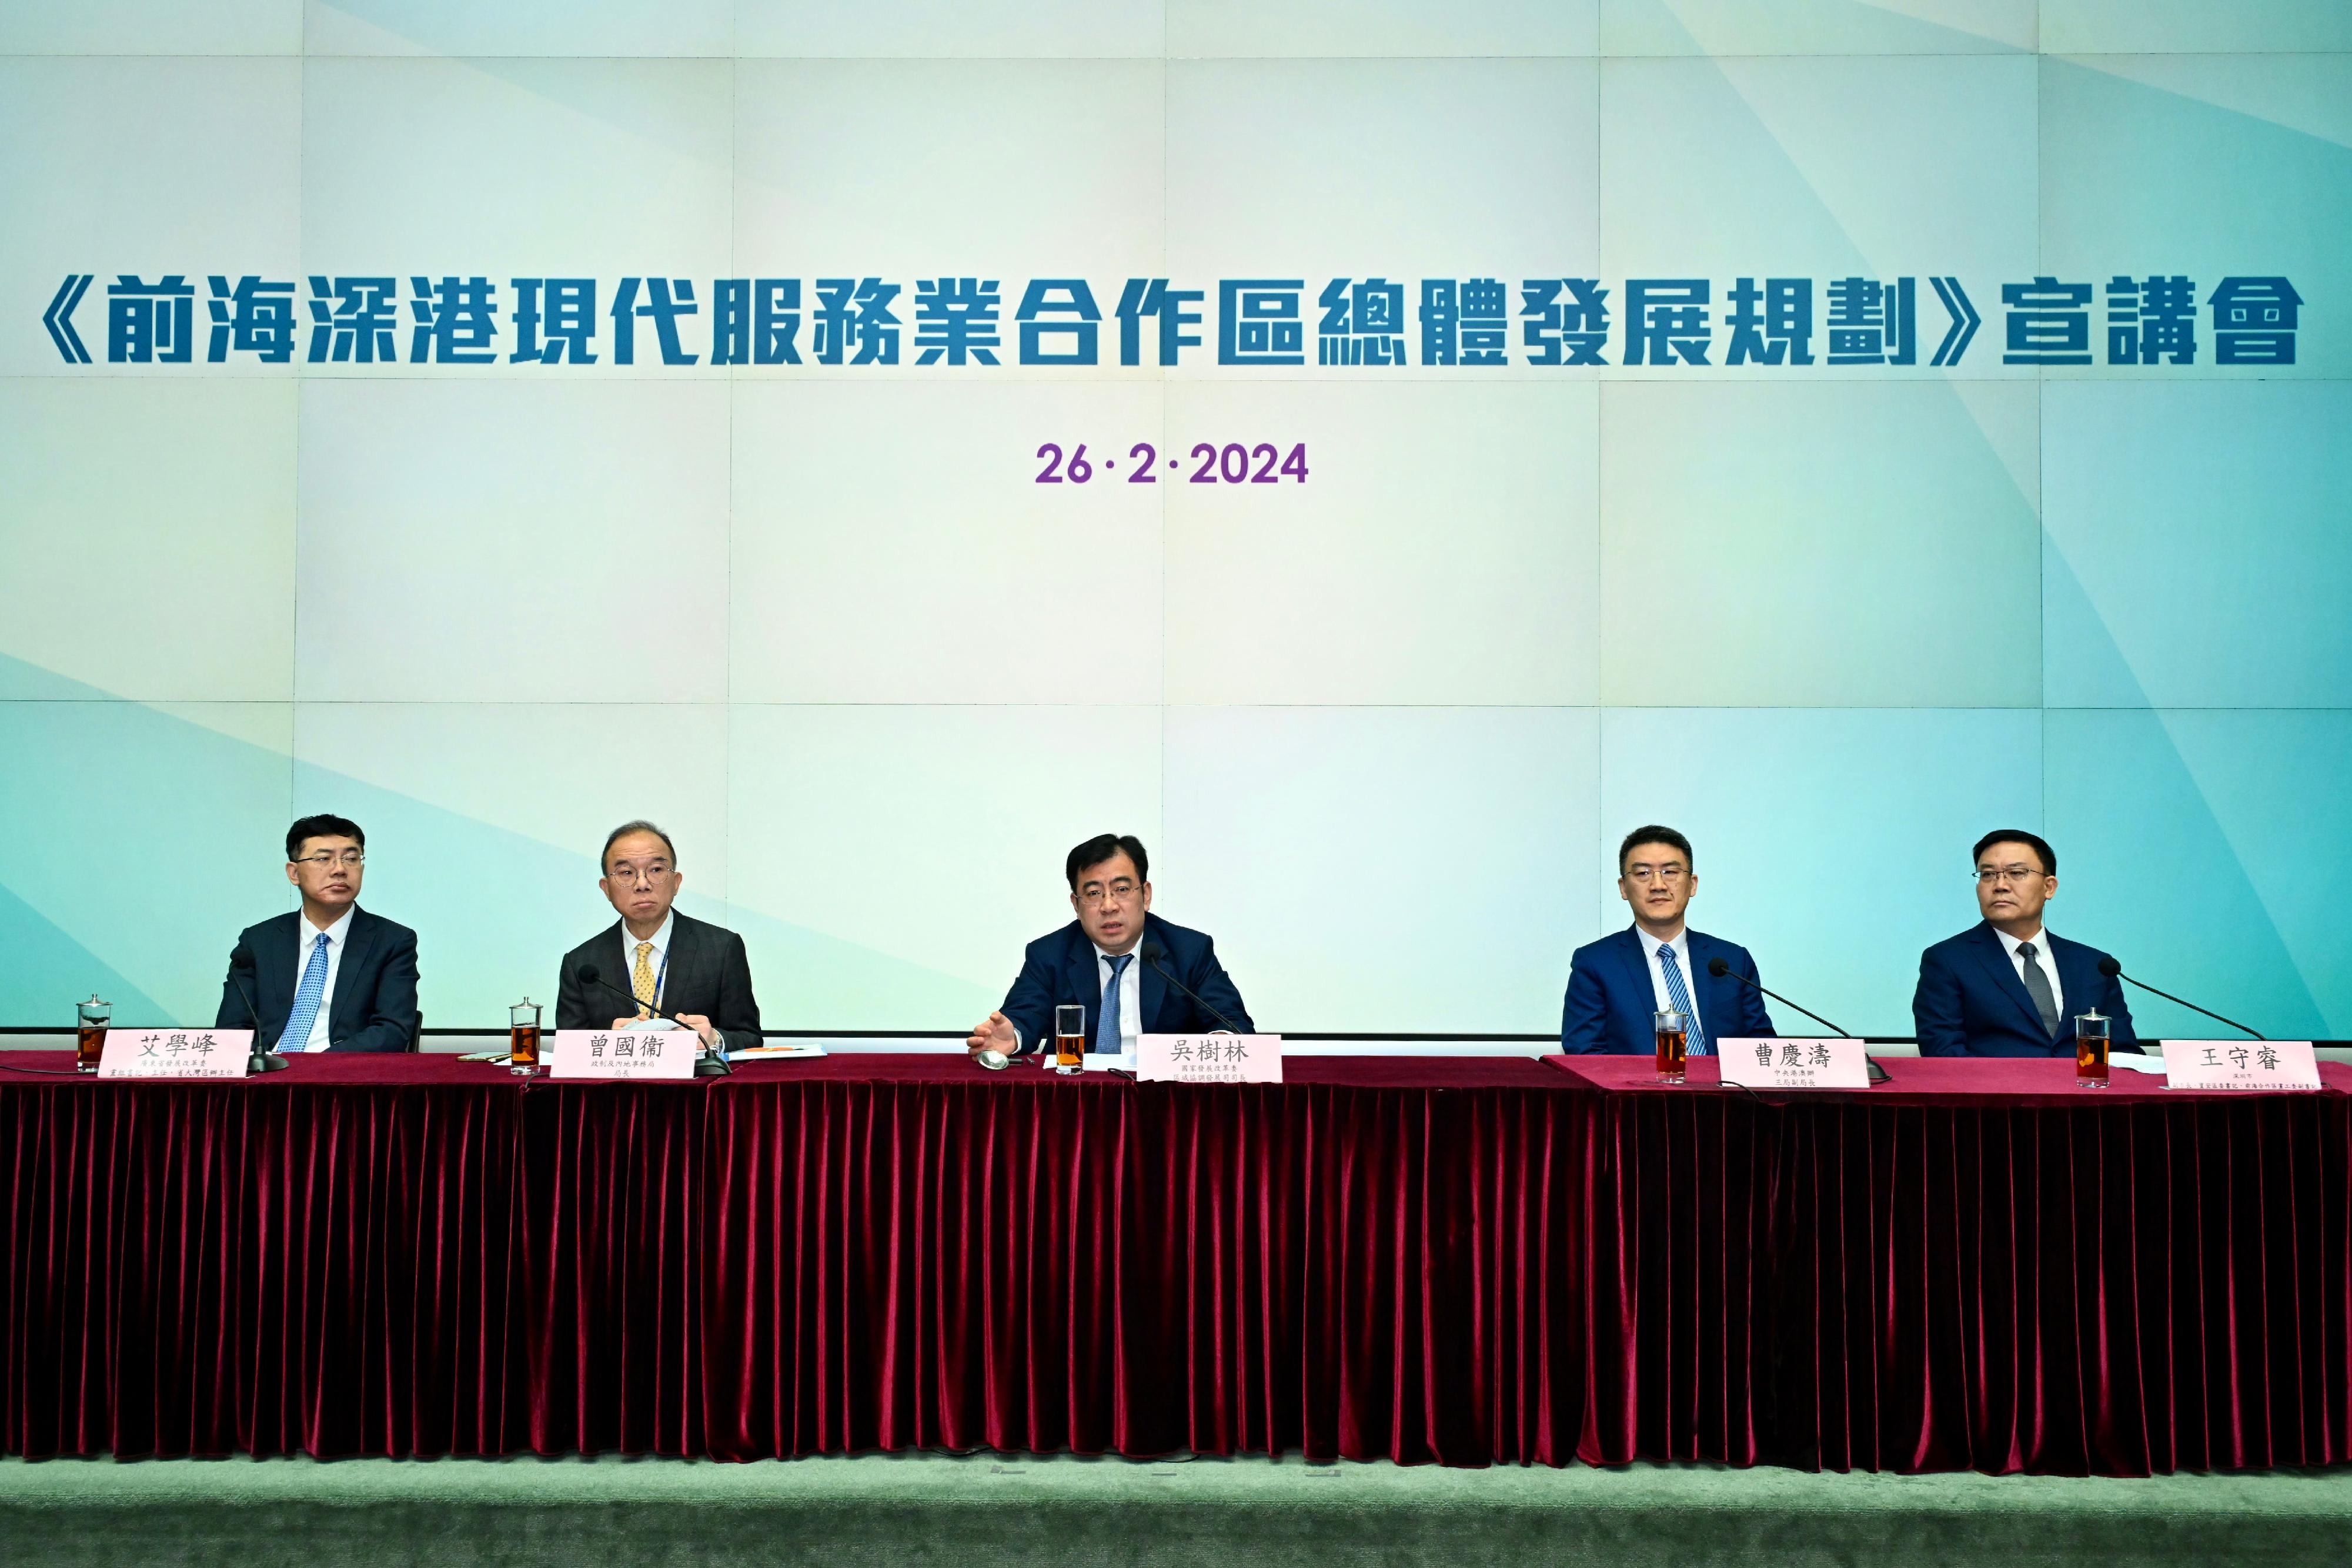 The Hong Kong Special Administrative Region Government held a seminar to promote the Overall Development Plan for the Qianhai Shenzhen-Hong Kong Modern Service Industry Co-operation Zone at Central Government Offices today (February 26). Photo shows the delegation led by the Director General of the Department of Regional Economy of the National Development and Reform Commission, Mr Wu Shulin (centre), and the Secretary for Constitutional and Mainland Affairs, Mr Erick Tsang Kwok-wai (second left), having exchange with participants on how to resolutely uphold the Central Government’s strategic decisions on Qianhai development. 